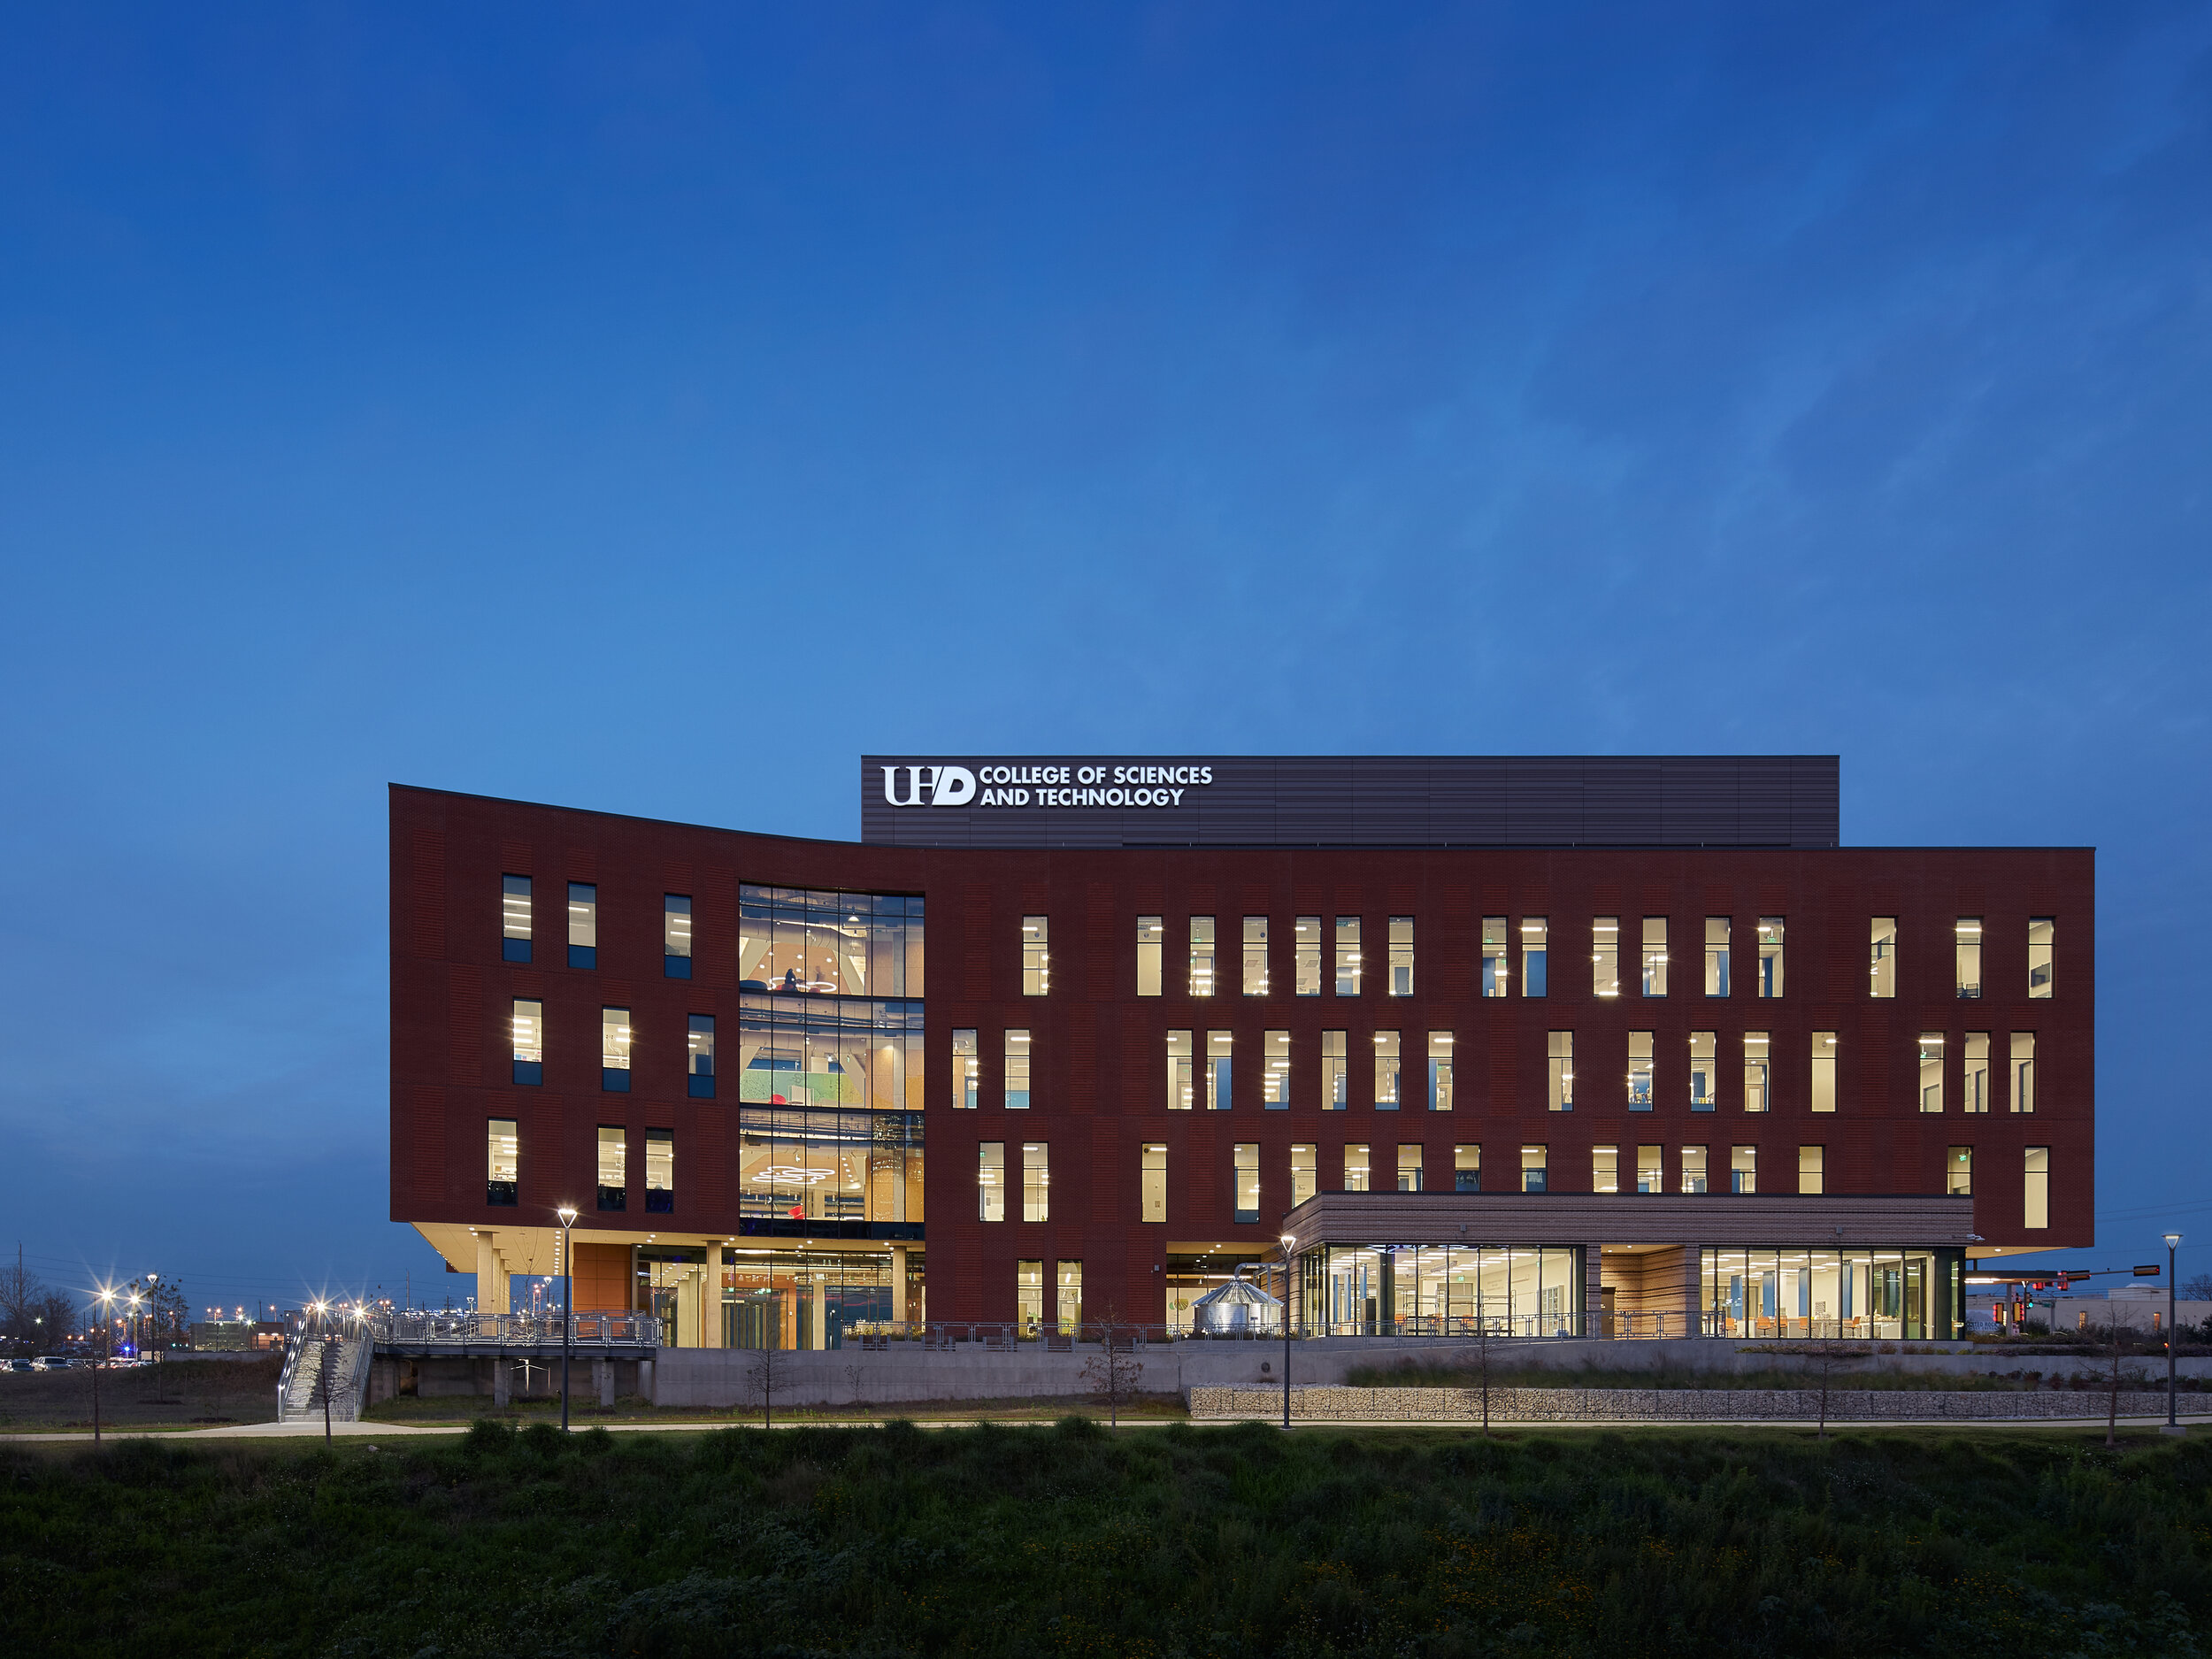   UHD COLLEGE OF SCIENCES AND TECHNOLOGY   KIRKSEY ARCHITECTURE  HOUSTON, TX  © JONATHAN DEAN 